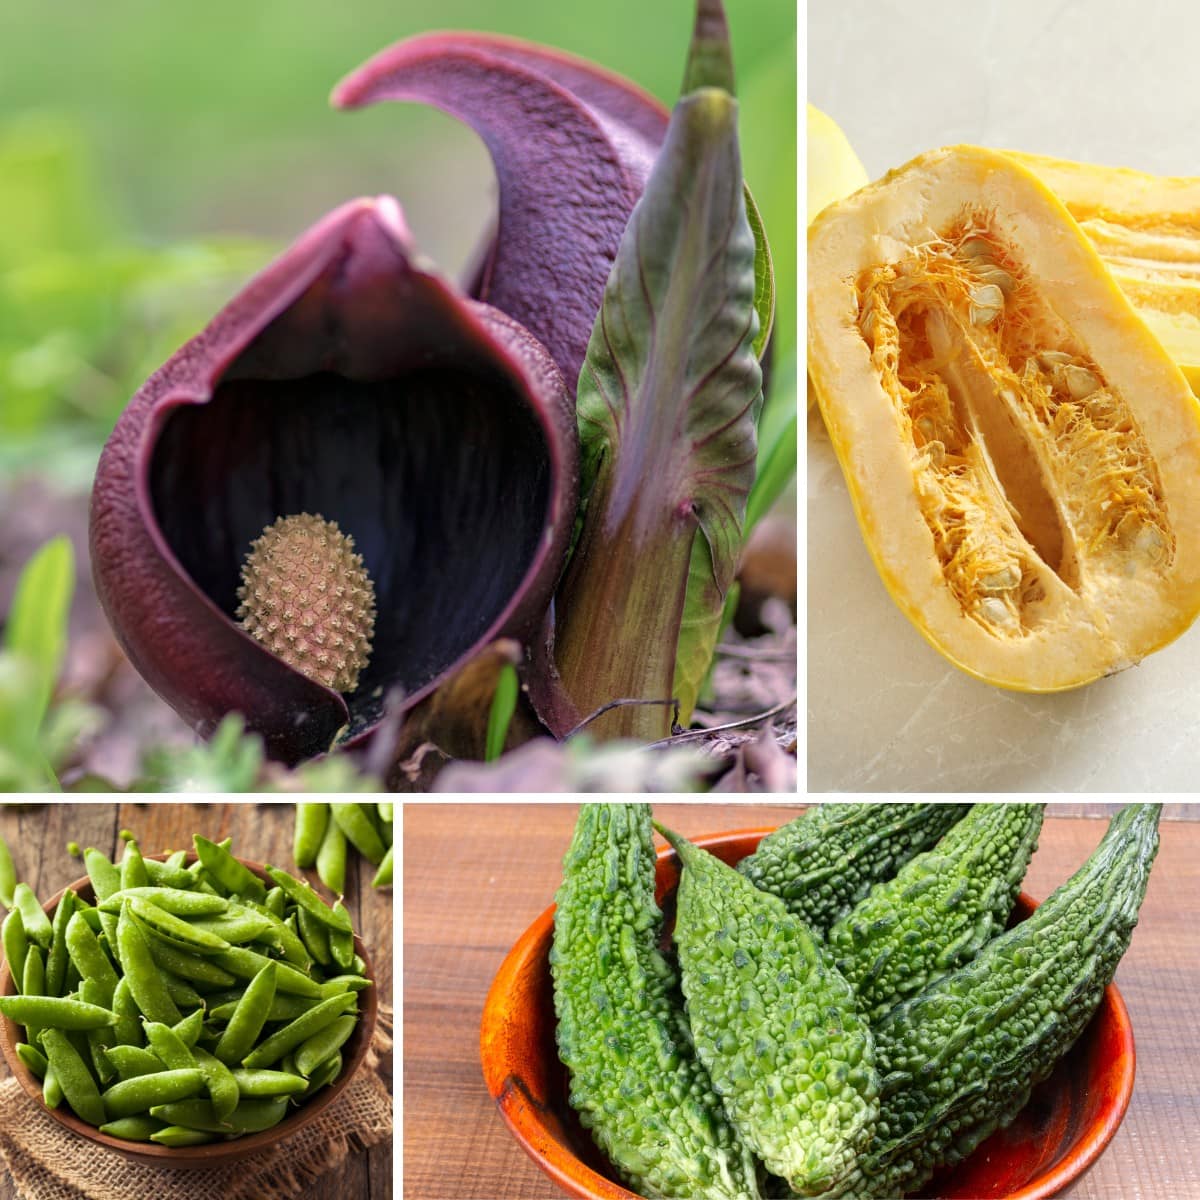 A collage of pictures showing different types of vegetables.